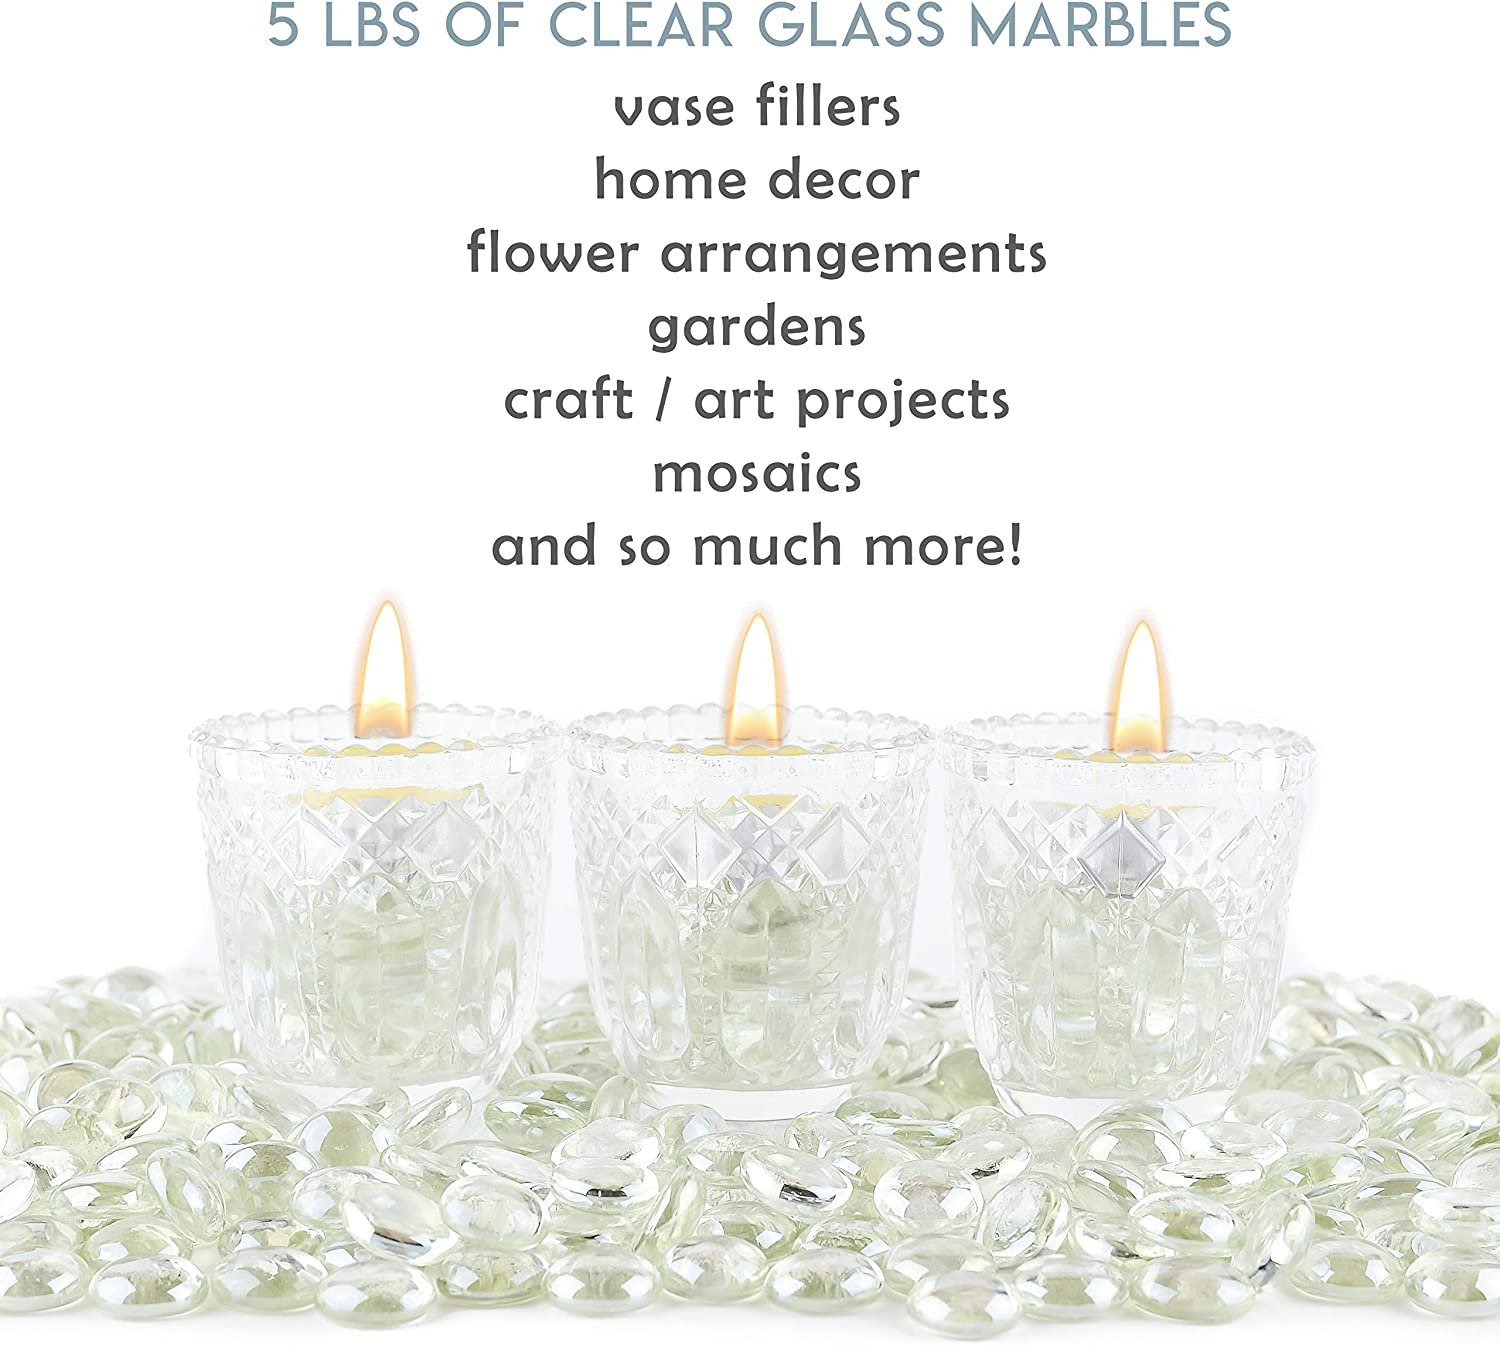 Galashield Clear Flat Glass Marbles for Vases Glass Gems Beads Pebbles Vase Filler 5 lbs, Approx. 450 Pcs - image 4 of 6